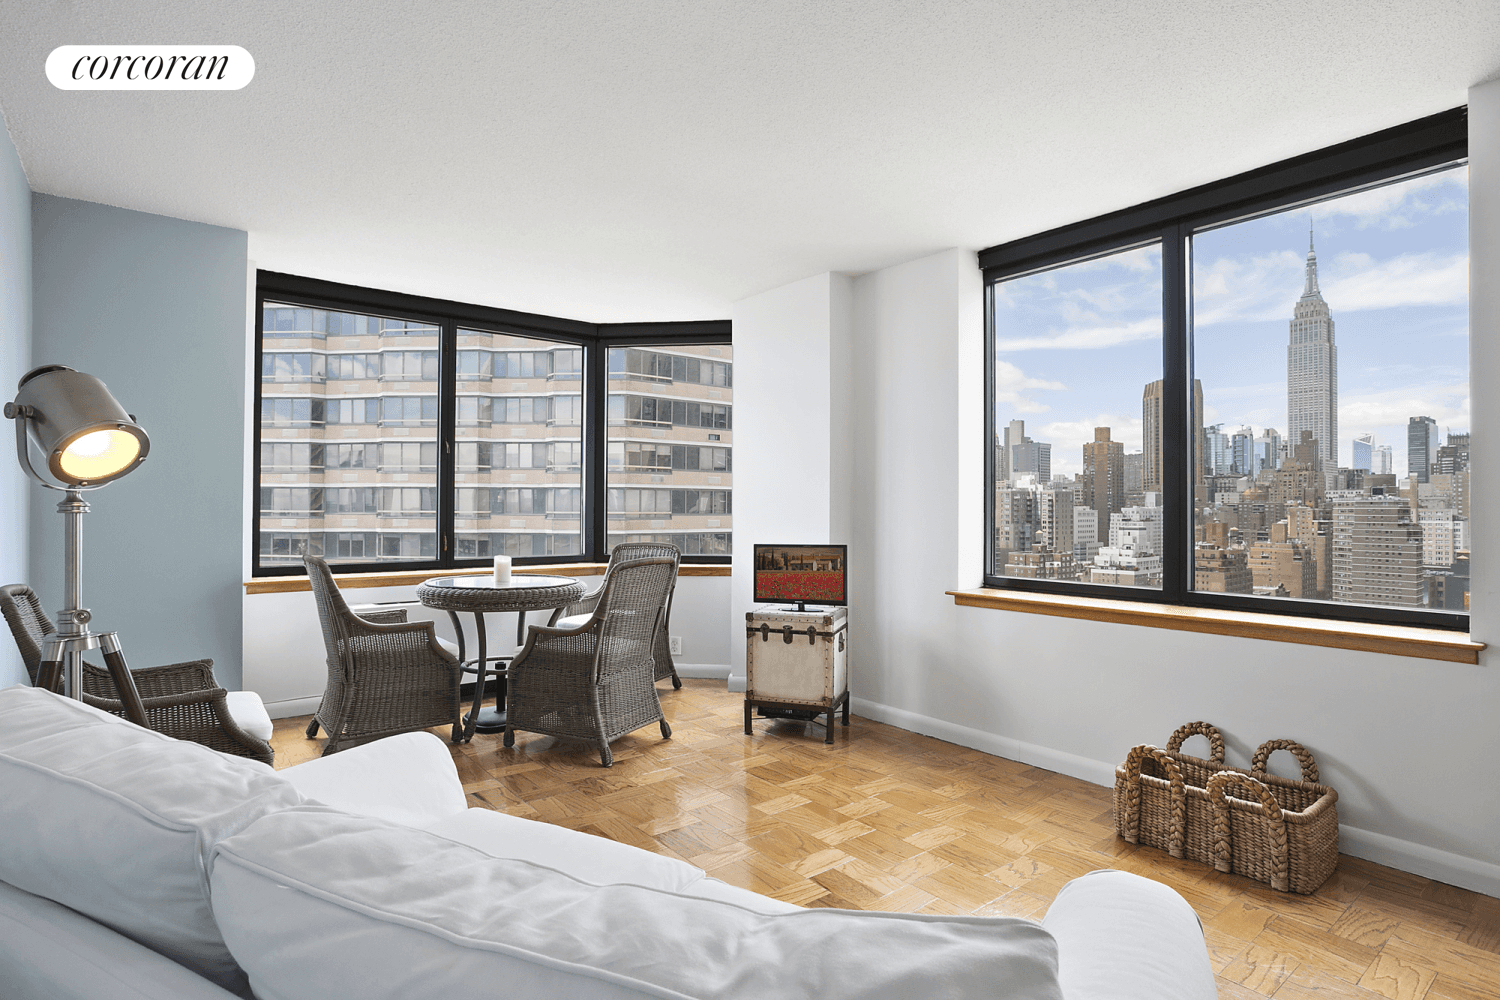 Don't miss this sunny one bed condo rental at 415 East 37th St Apt.